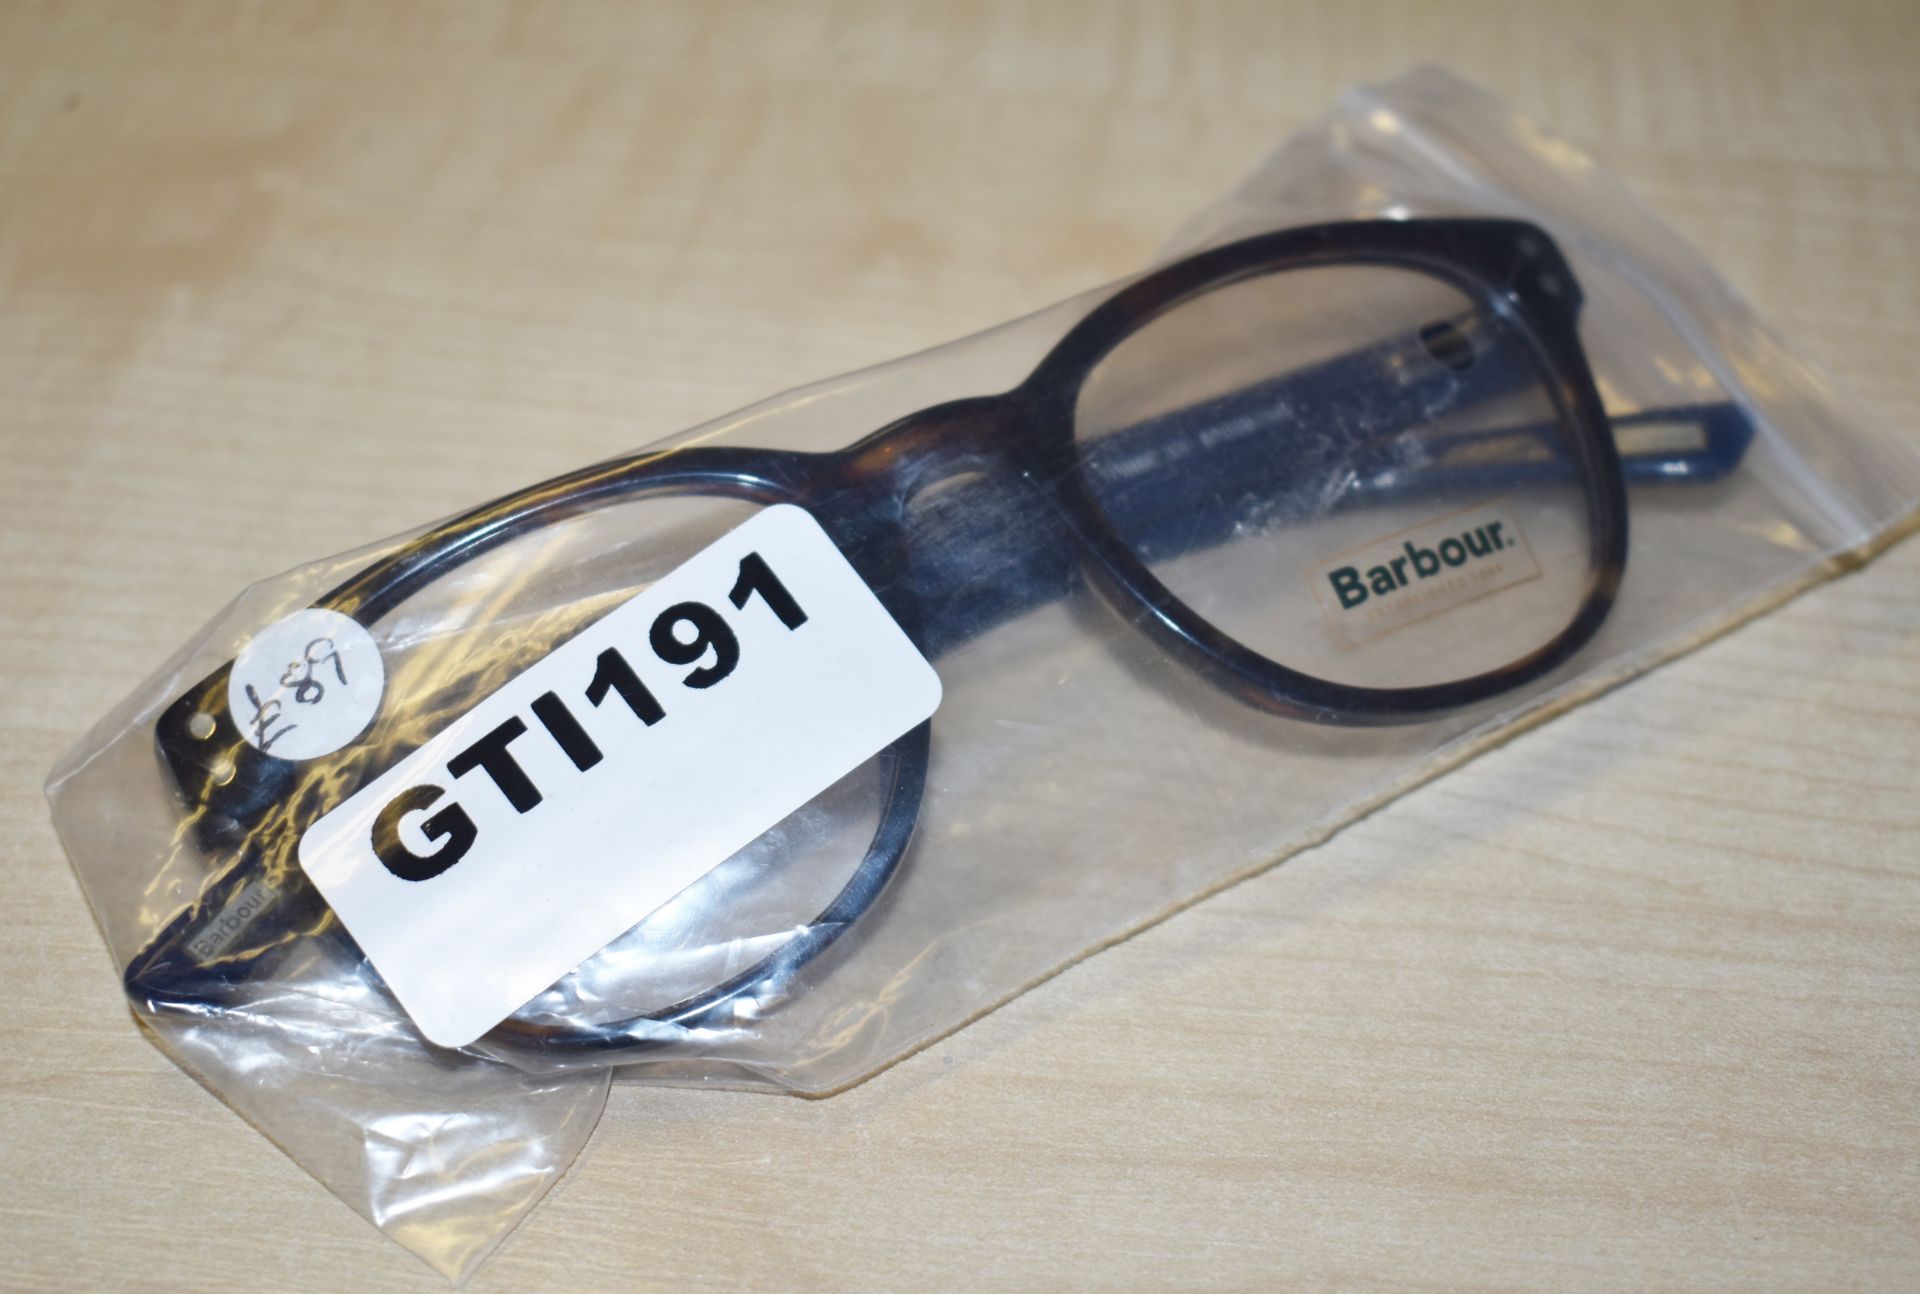 1 x Genuine BARBOUR Spectacle Eye Glasses Frame - Ex Display Stock  - Ref: GTI191 - CL645 - - Image 12 of 12